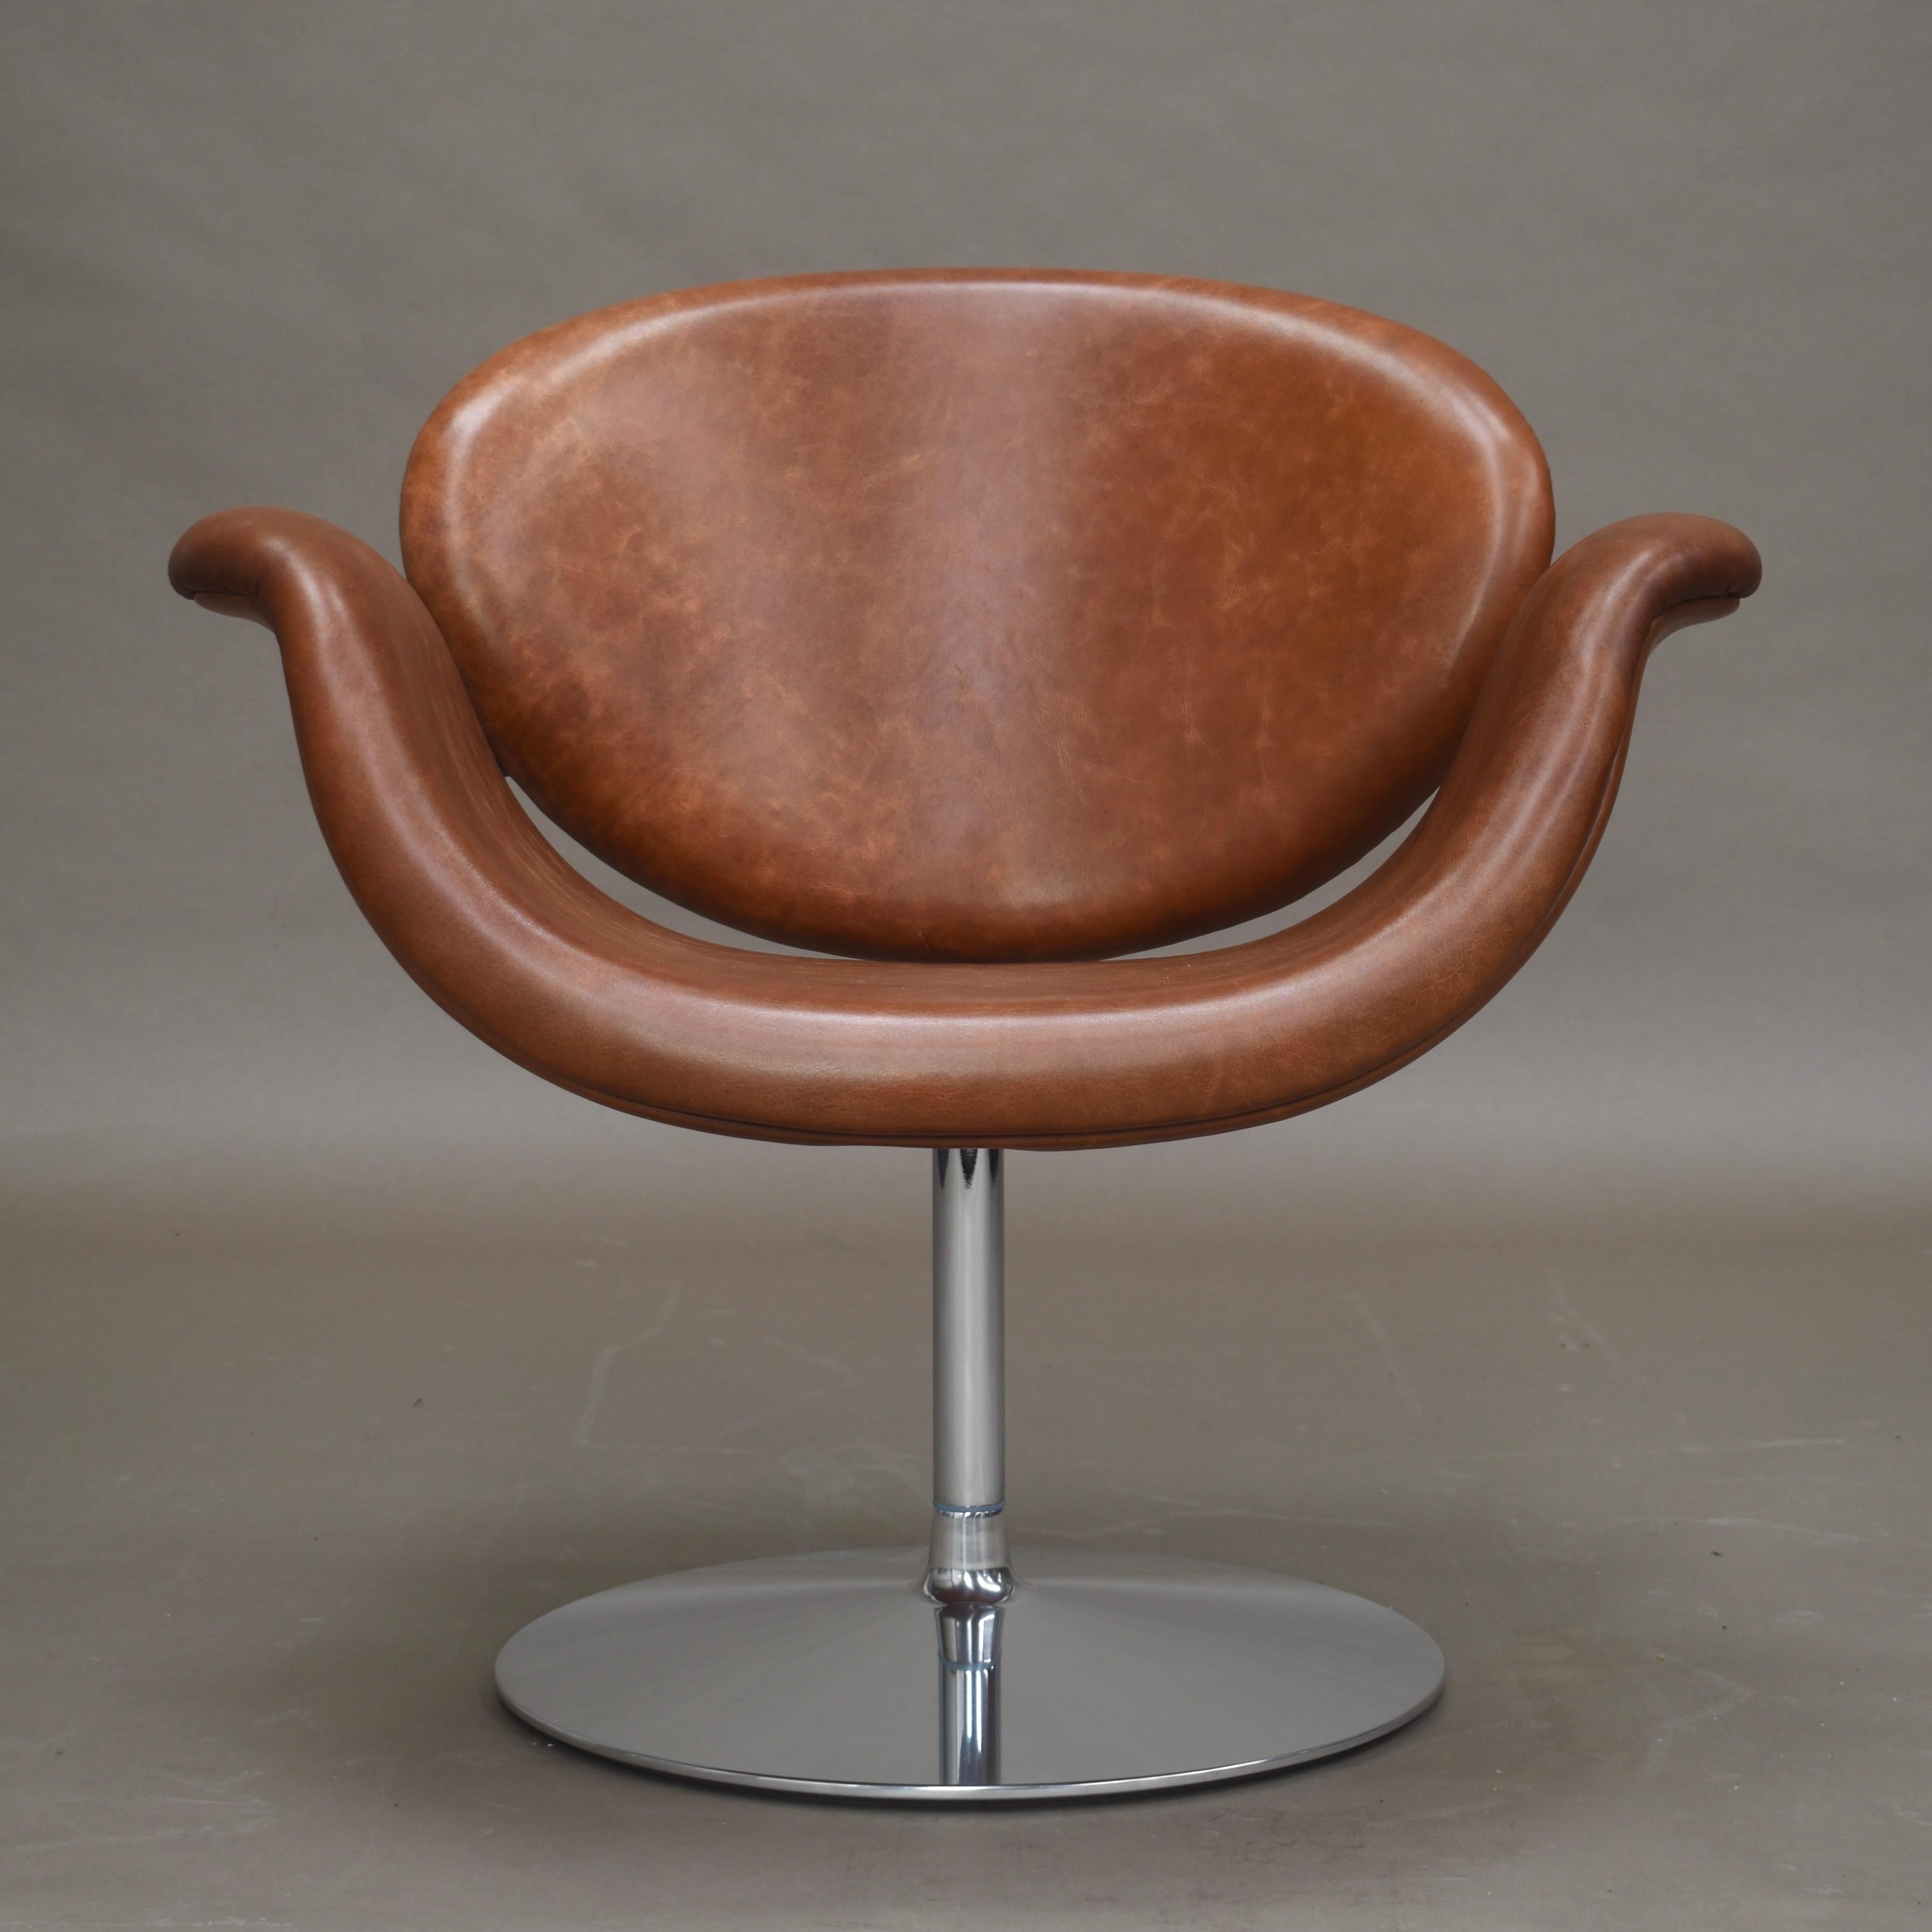 Iconic Tulip Midi swivel chair by Pierre Paulin for Artifort, Netherlands, 1960.
The chairs have been reupholstered by Artifort in a custom leather by Alphenberg.
This model is very comfortable and gives good ergonomic support, in particular to